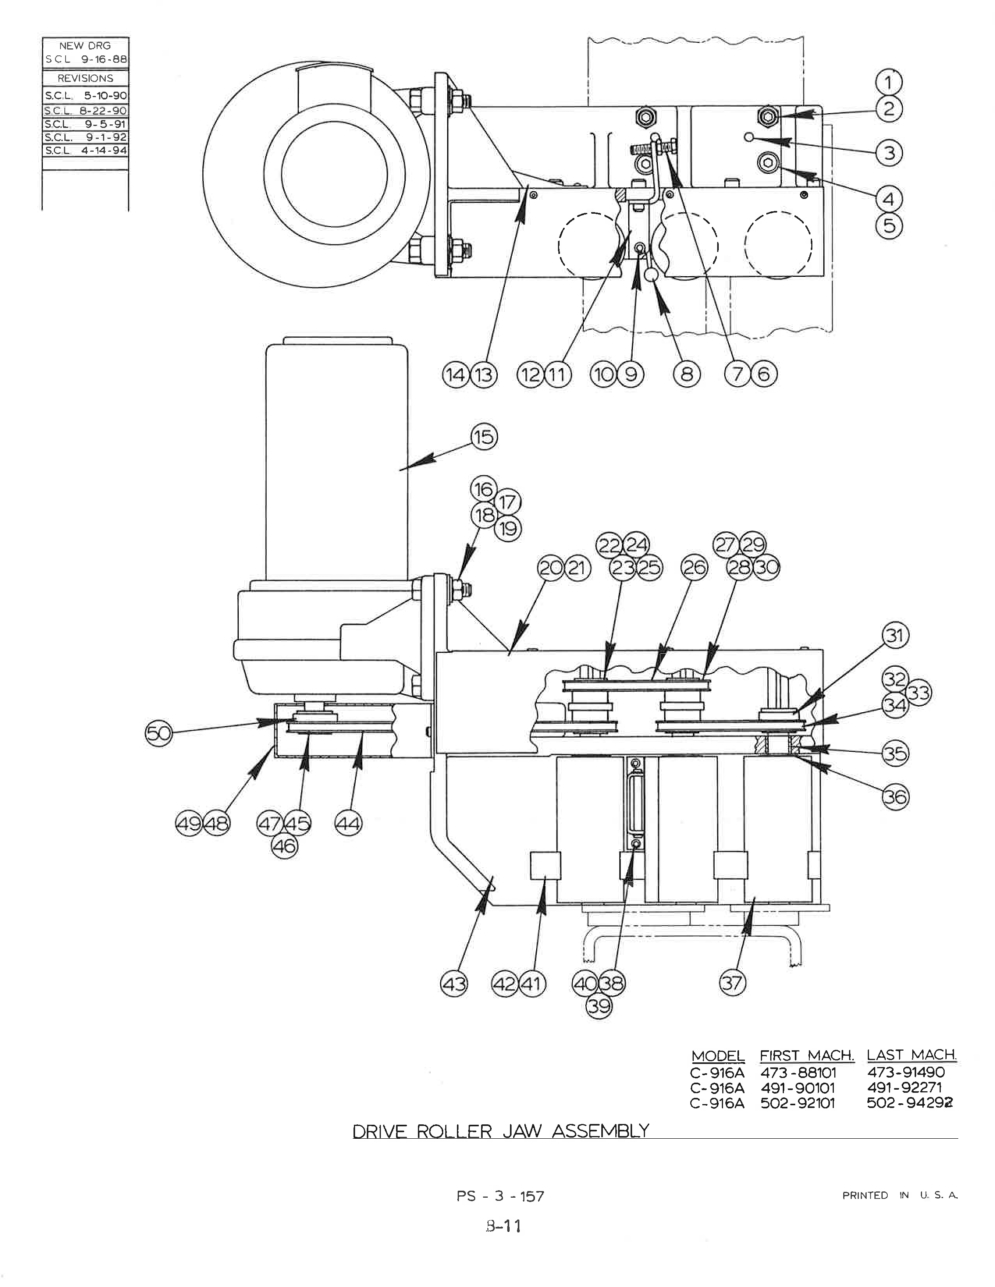 Exploded View Parts Ordering: C-916A_502